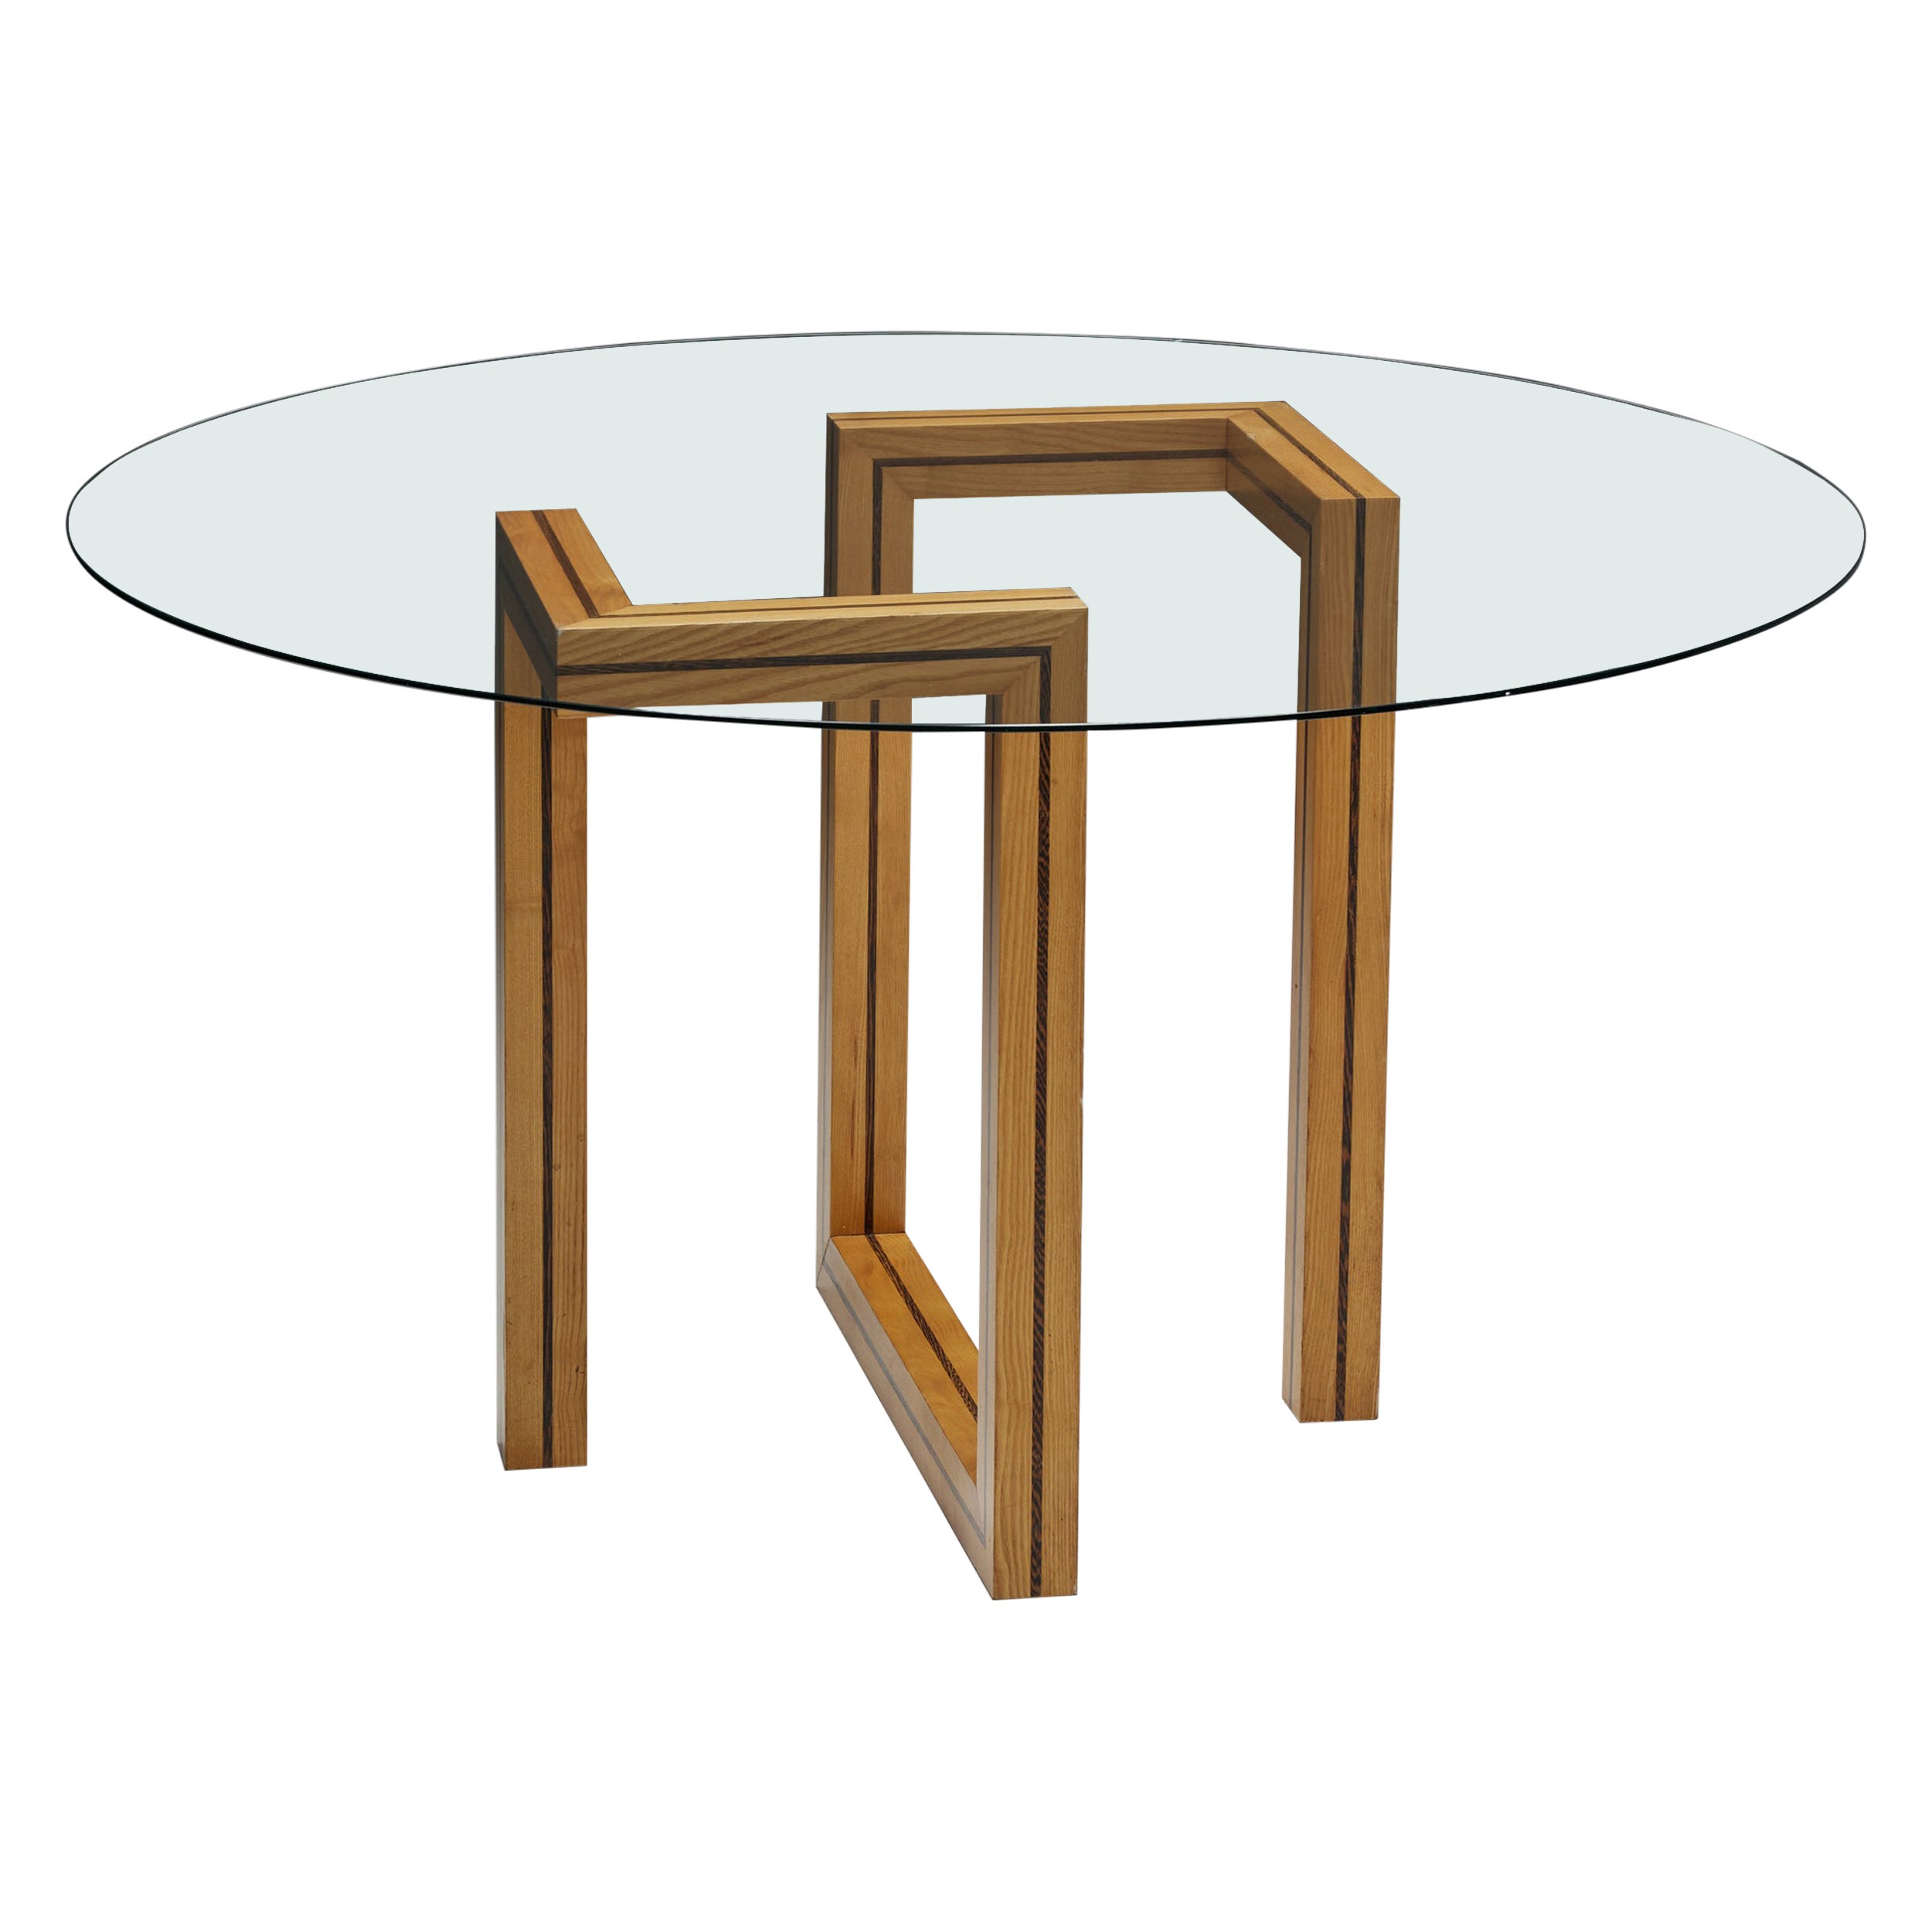 Postmodern Round Glass Dining Table with Geometric Base, 1970s For Sale